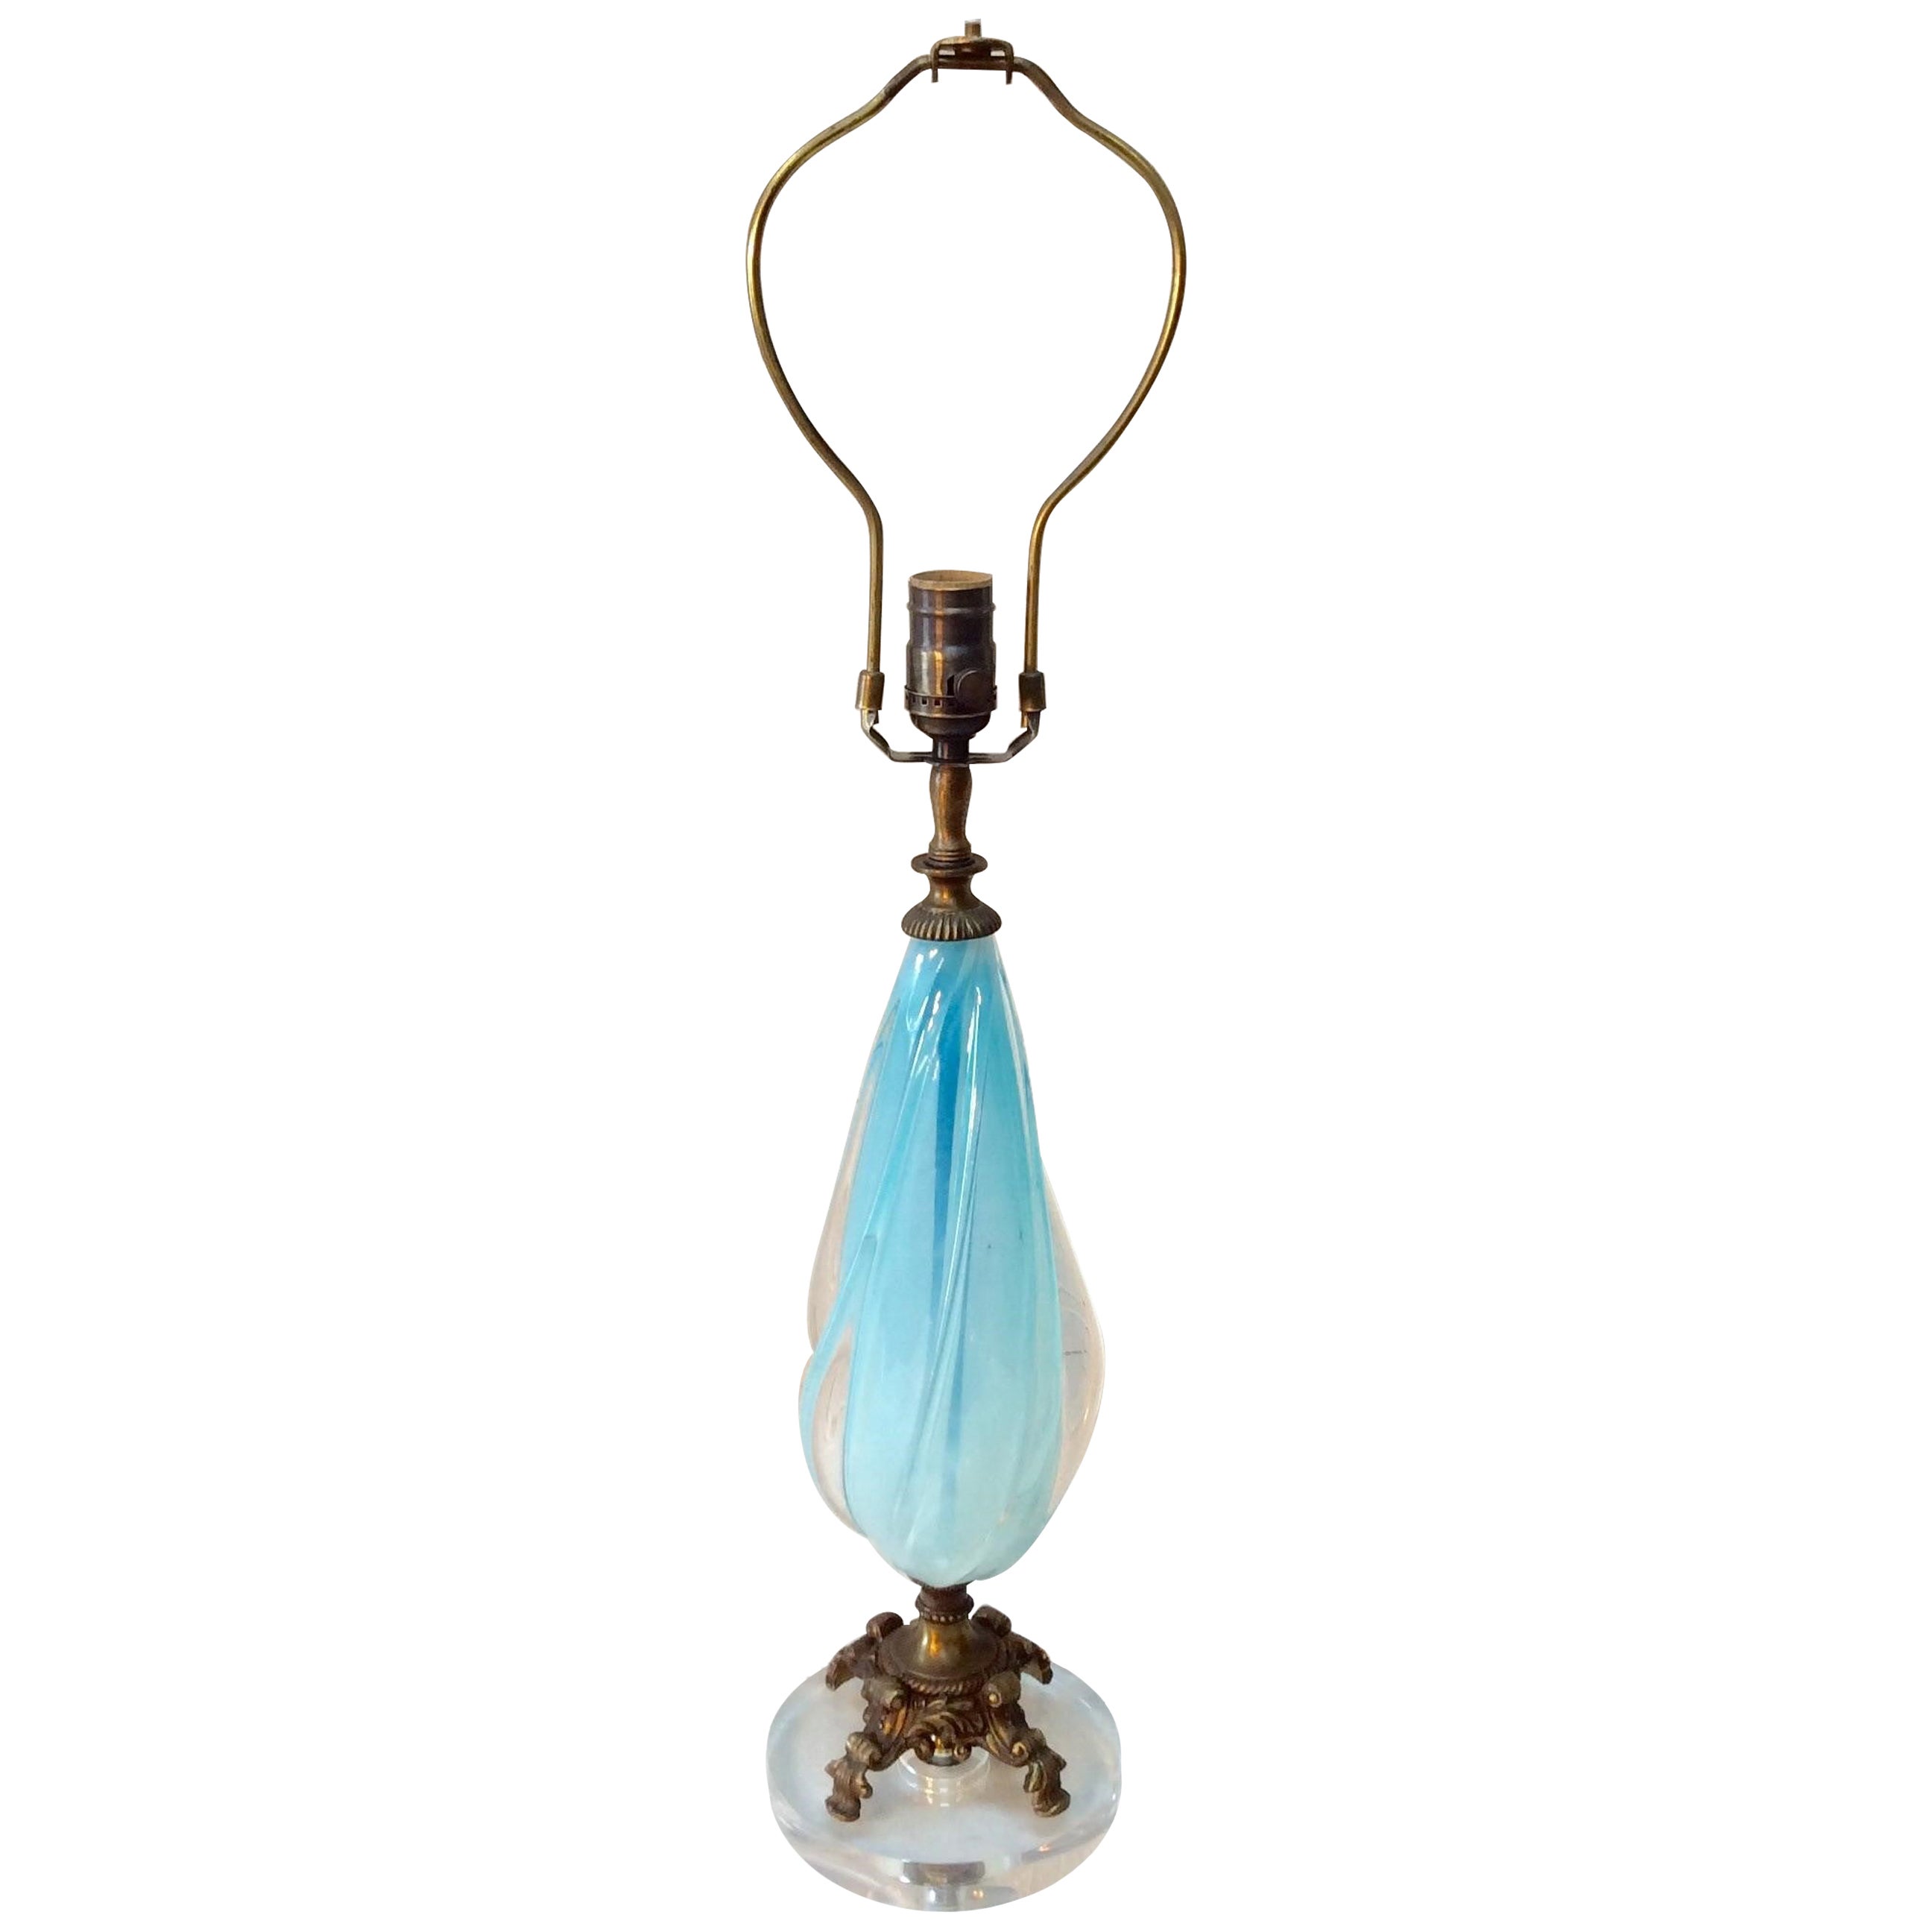 Mid-20th Century Murano Glass and Brass Table Lamp with Lucite Base